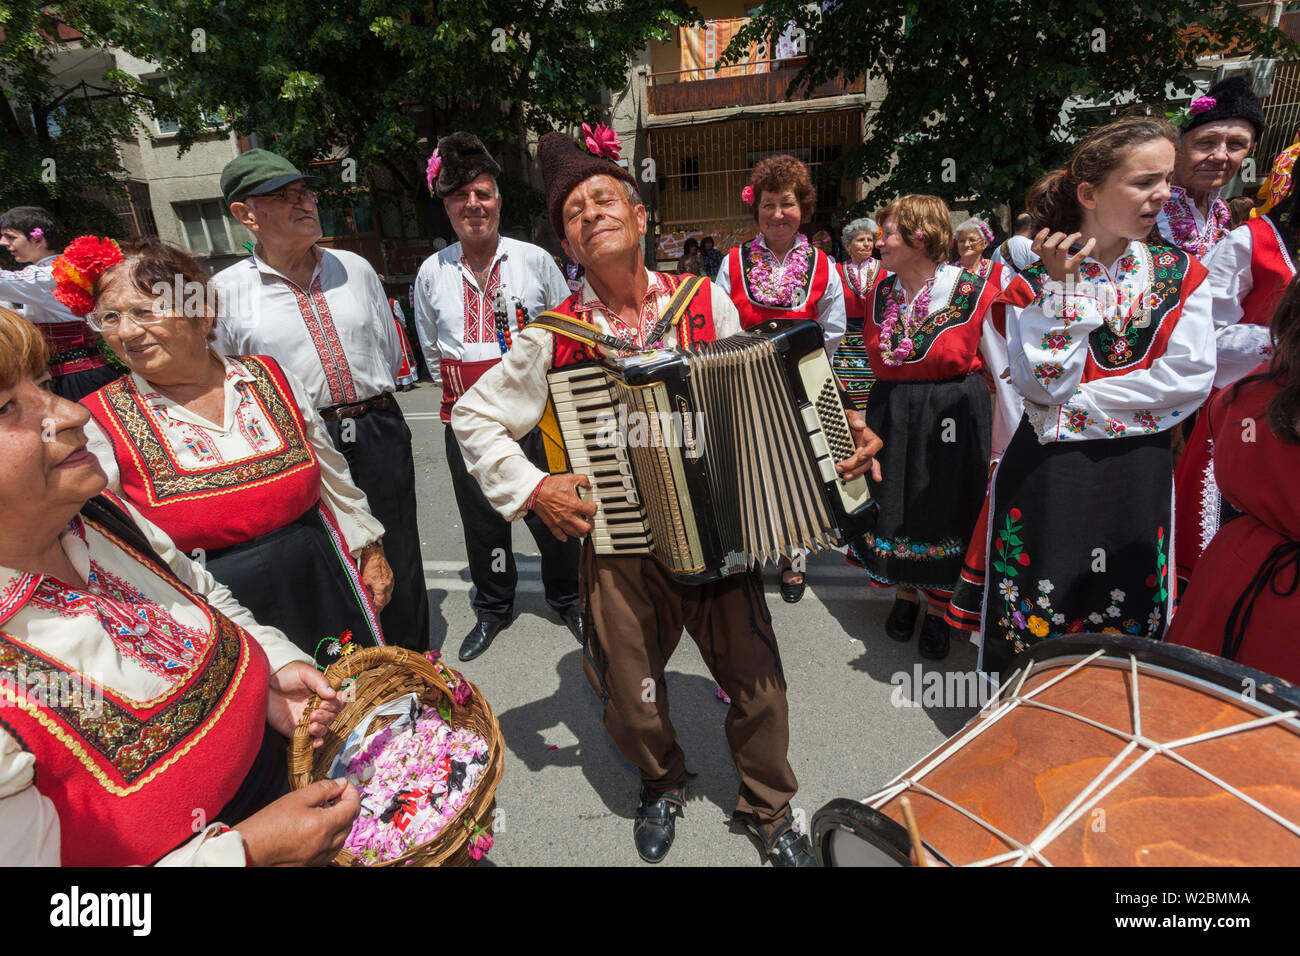 Bulgaria, Central Mountains, Kazanlak, Kazanlak Rose Festival, town produces 60% of the world's rose oil, Rose Parade, dancers and accordionist in traditional costumes, NR Stock Photo